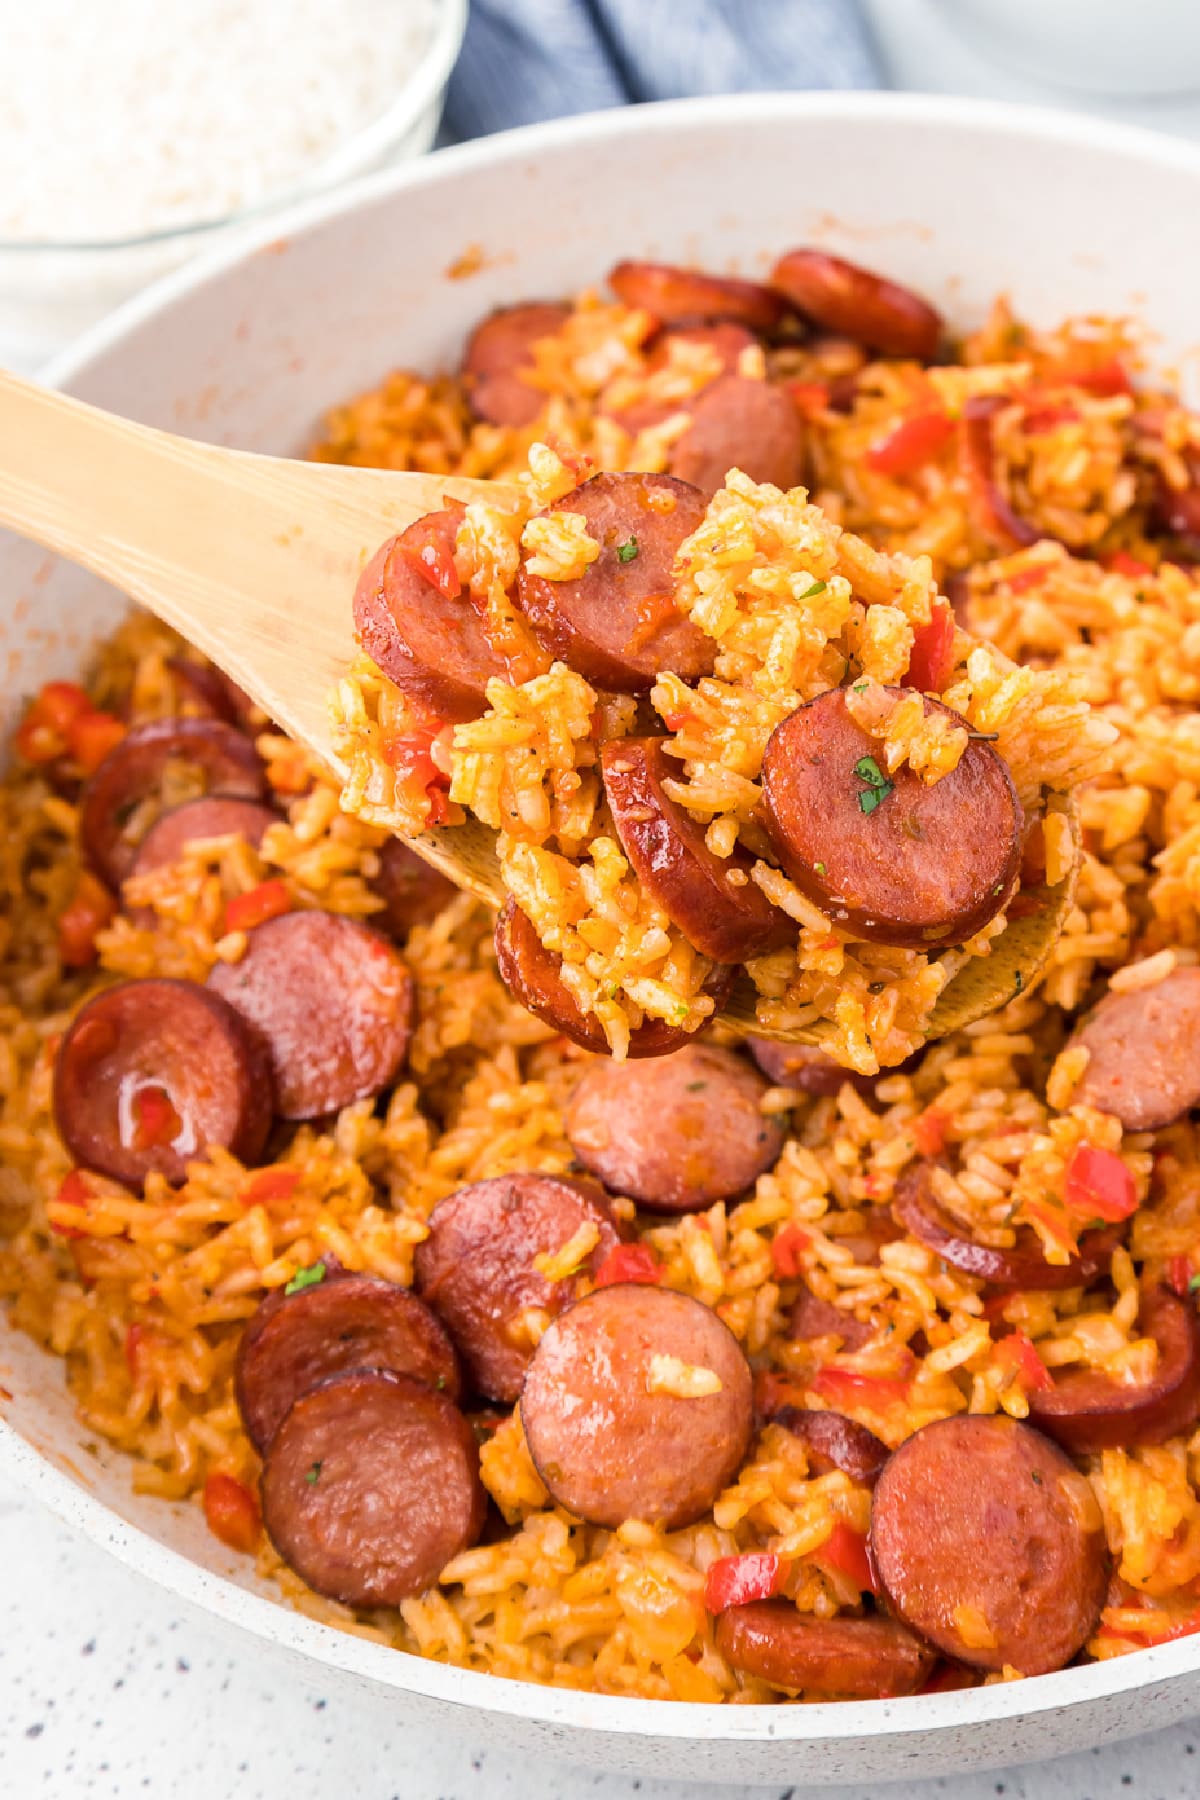 Sausage and red rice in a skillet being scooped with a wooden spoon.